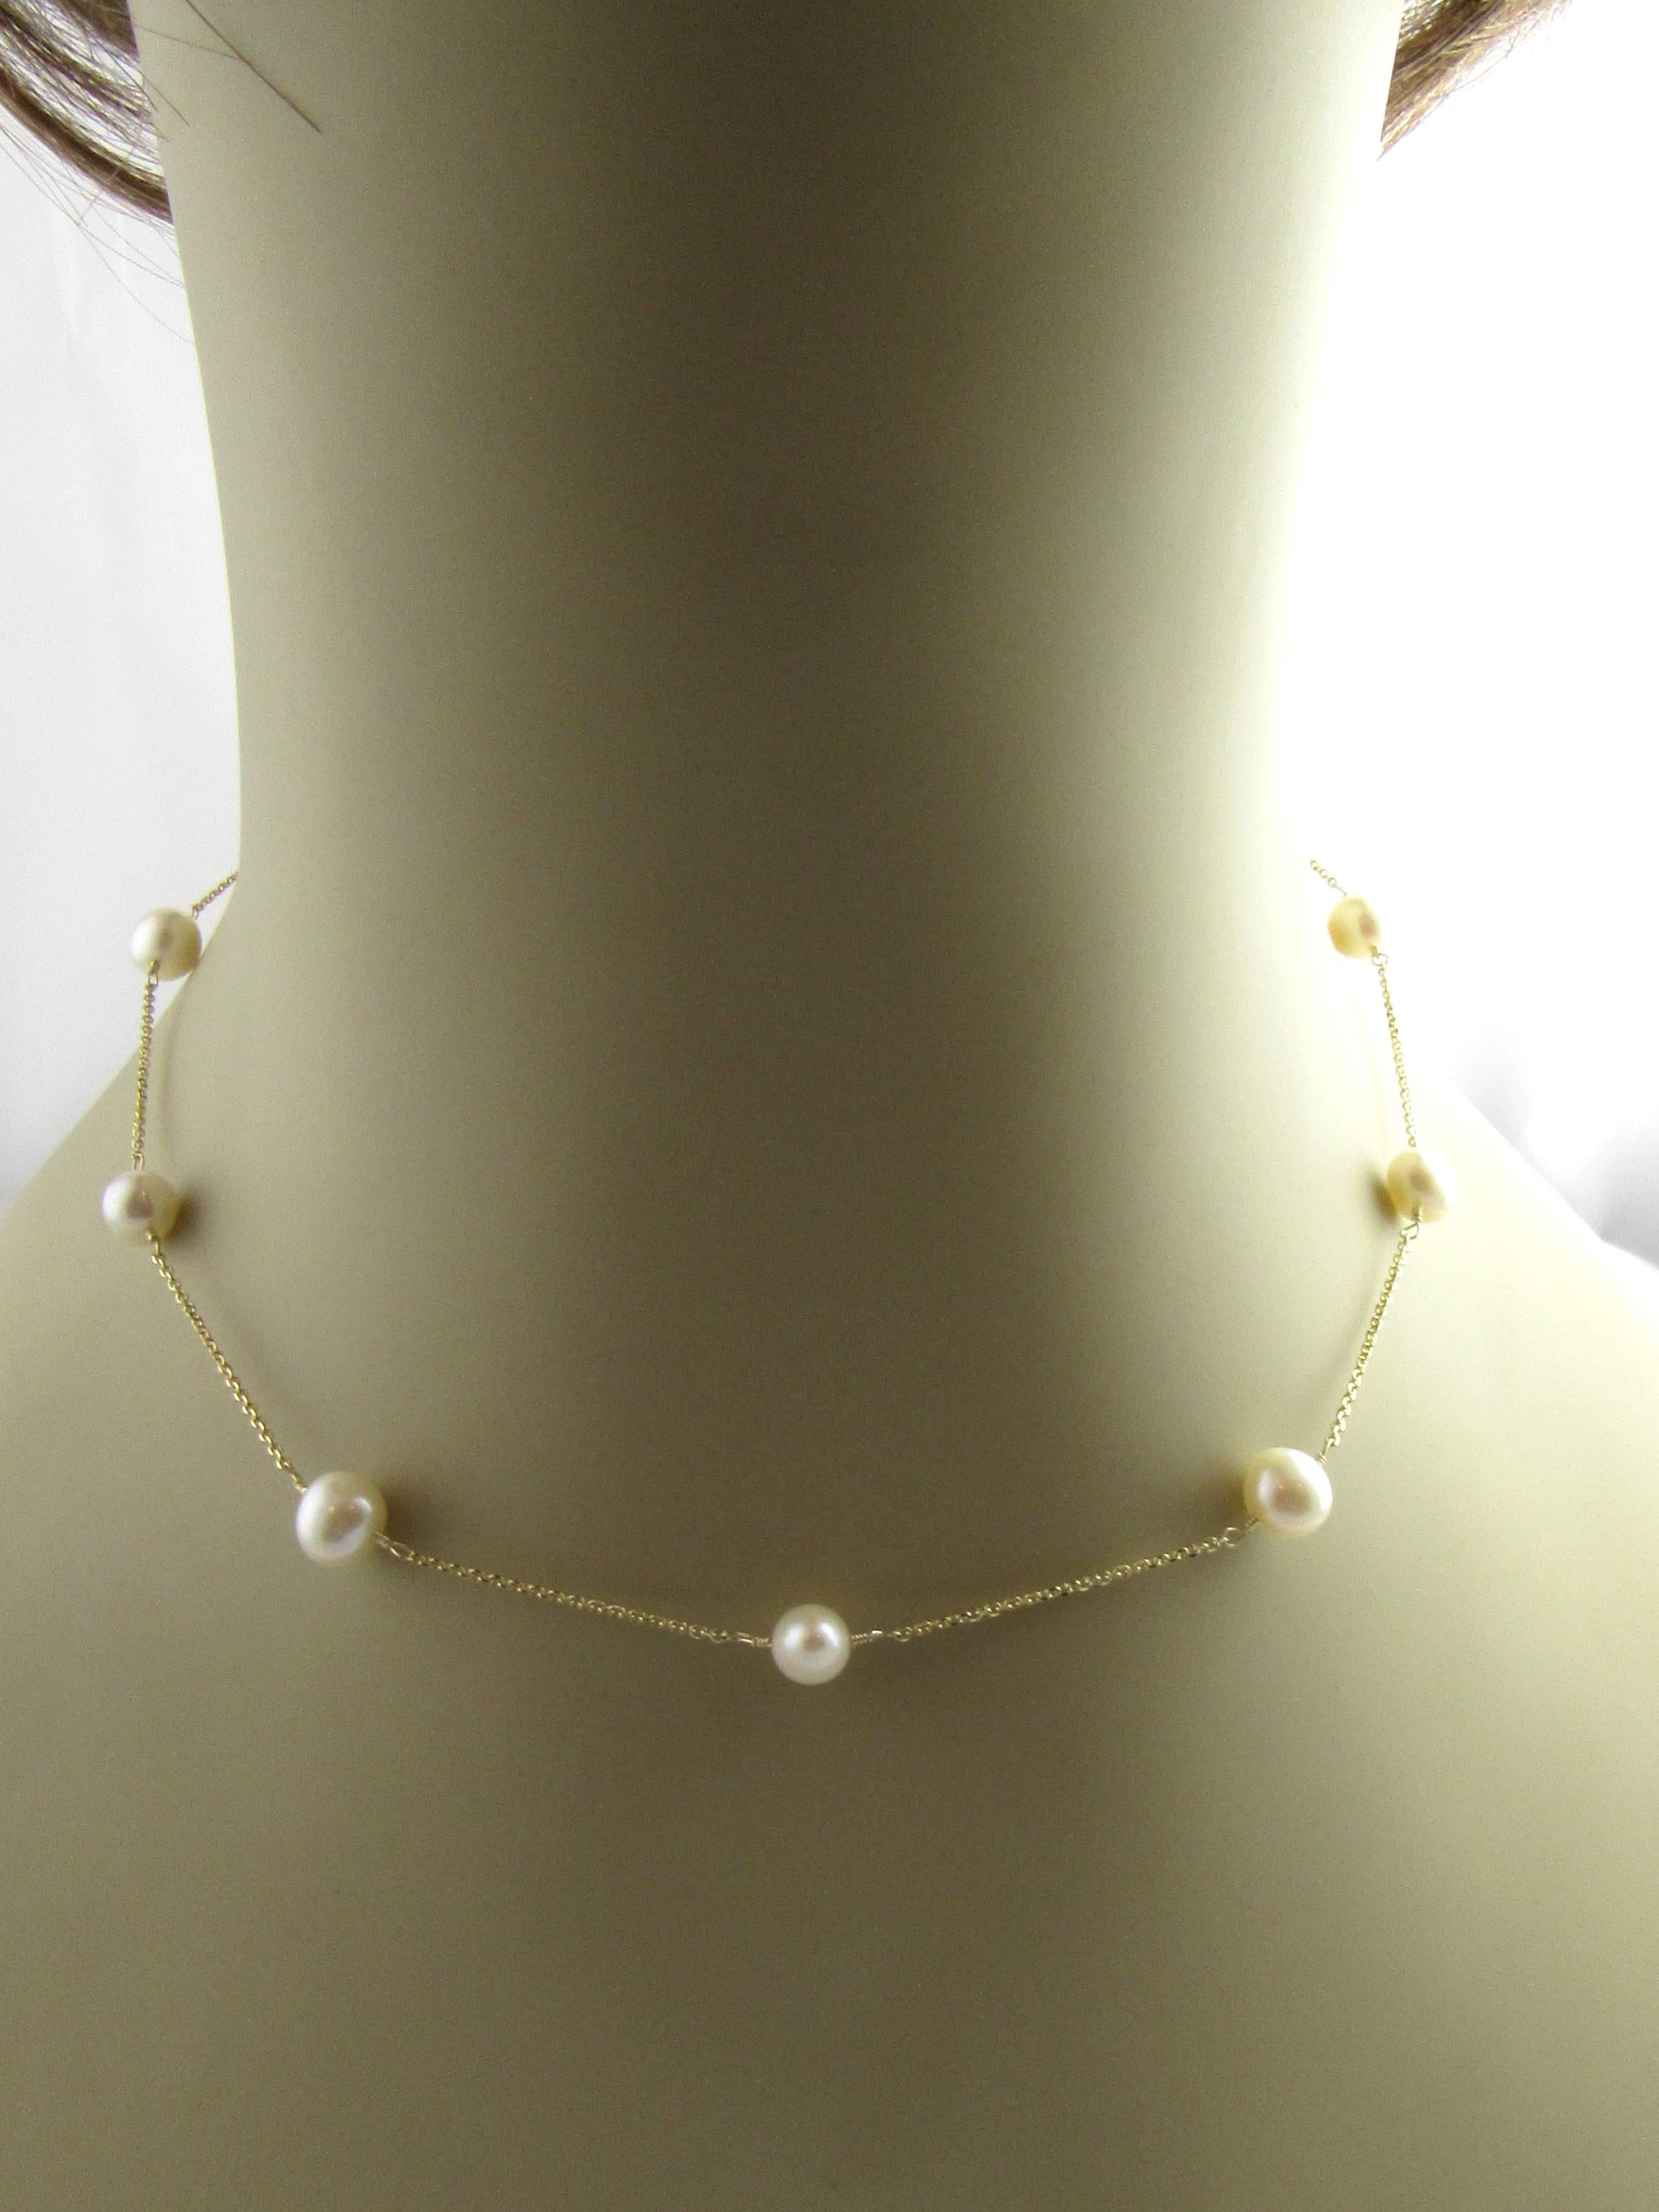 14 Karat Yellow Gold and Pearl Necklace For Sale 3